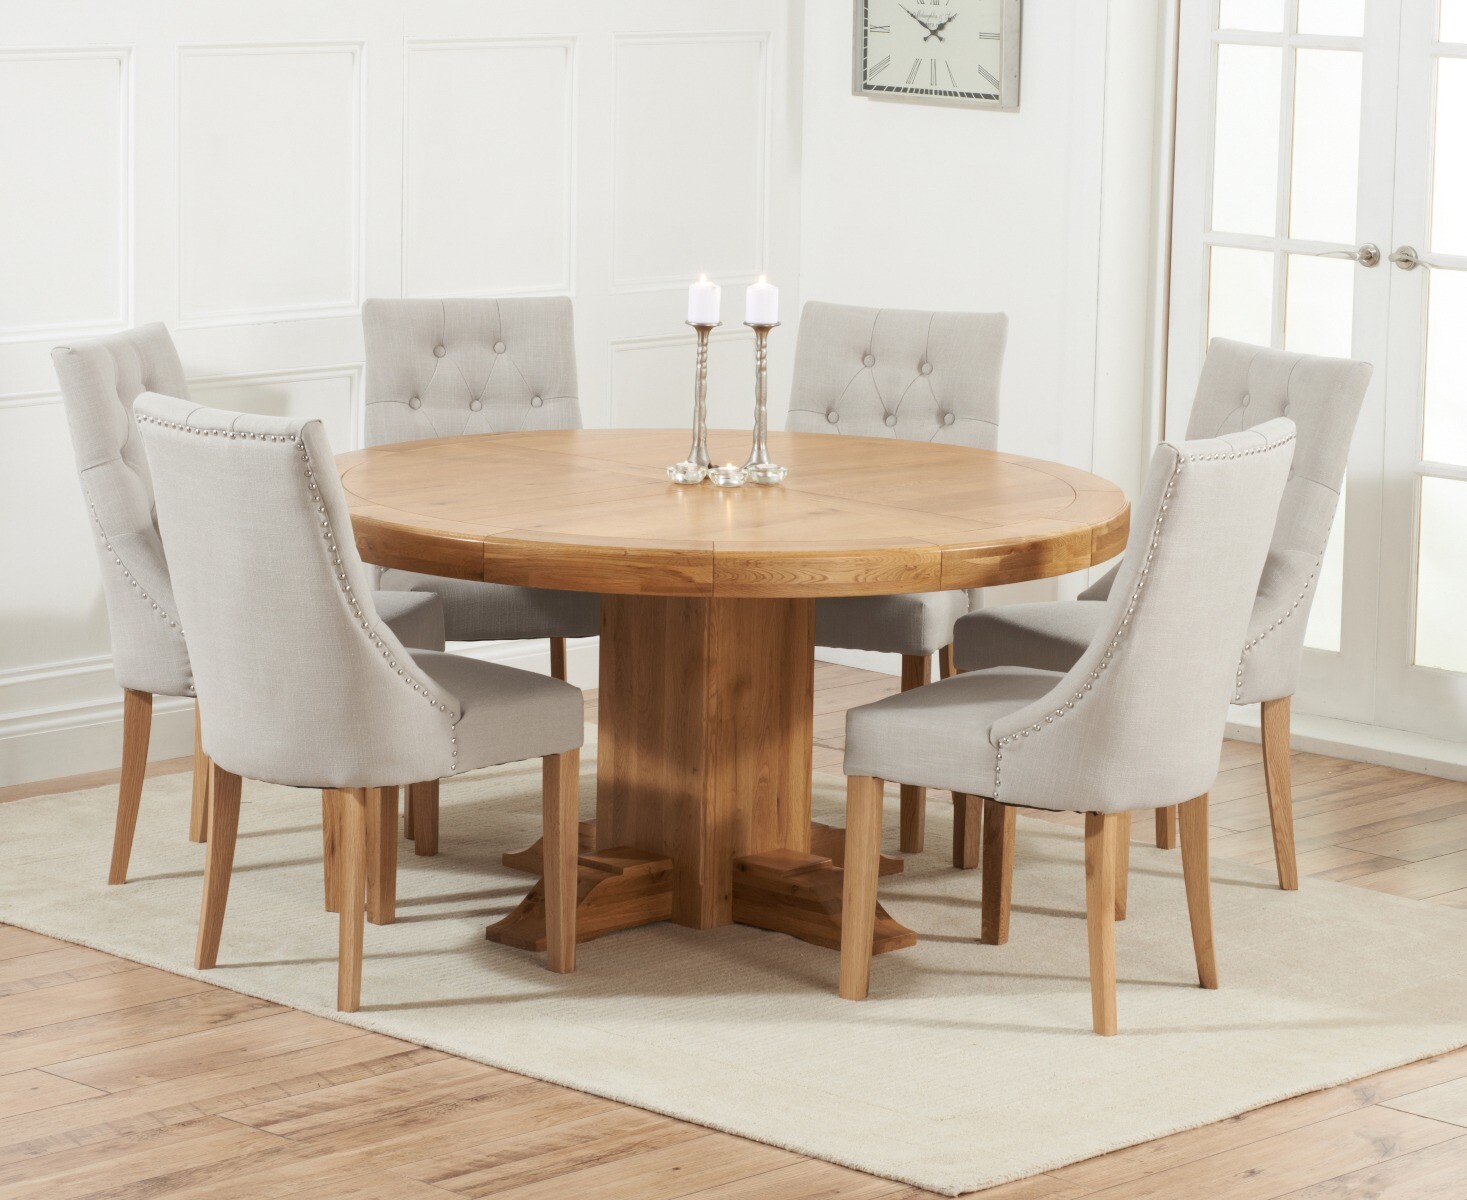 Photo 2 of Helmsley 150cm round oak dining table with 8 natural beatrix chairs